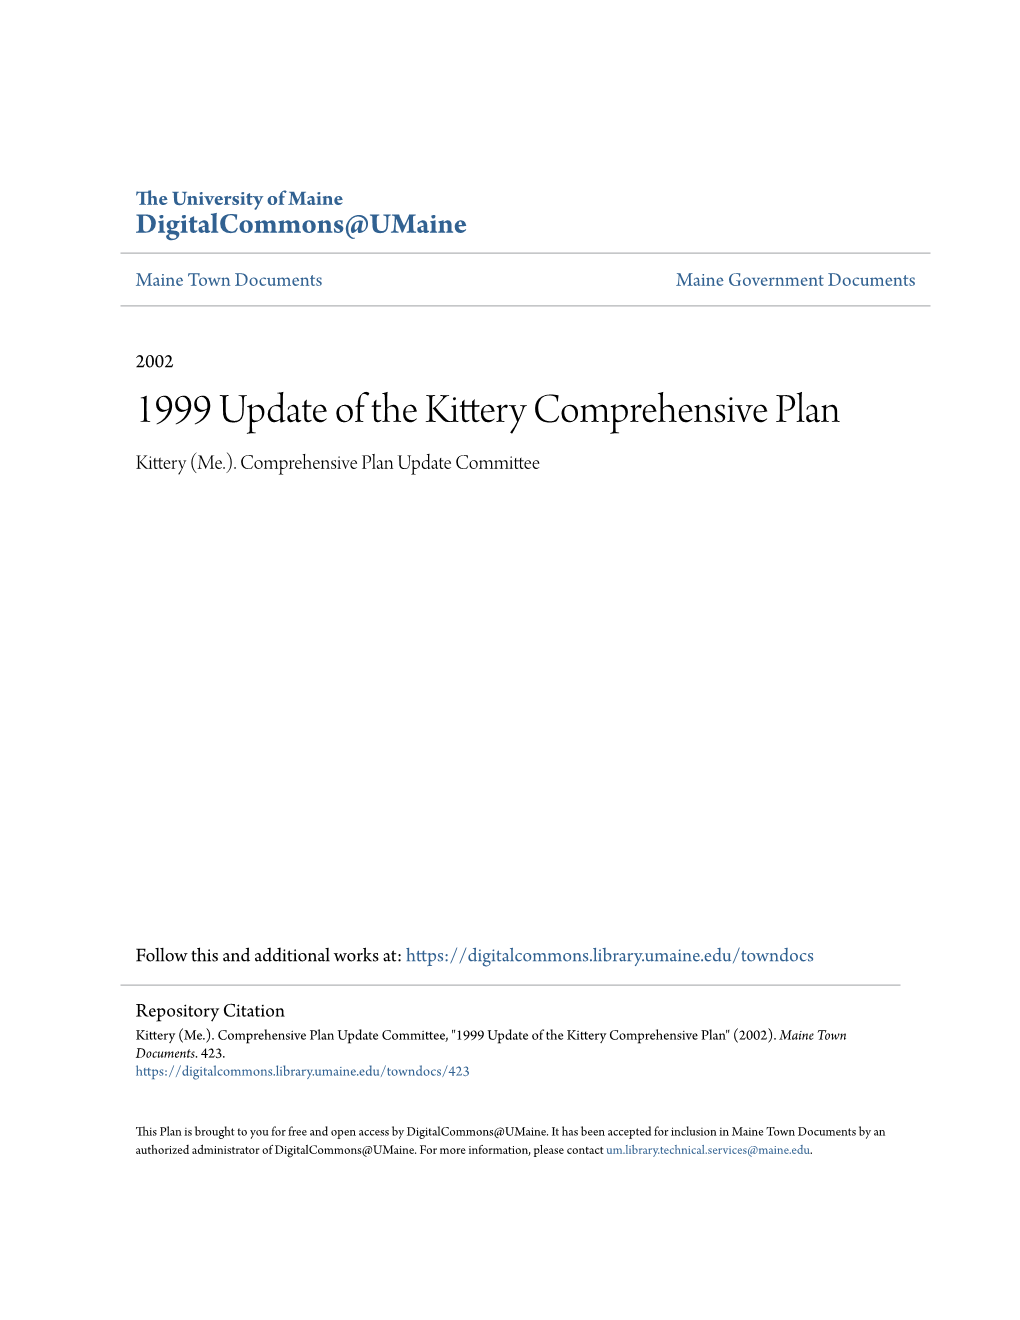 1999 Update of the Kittery Comprehensive Plan Kittery (Me.)